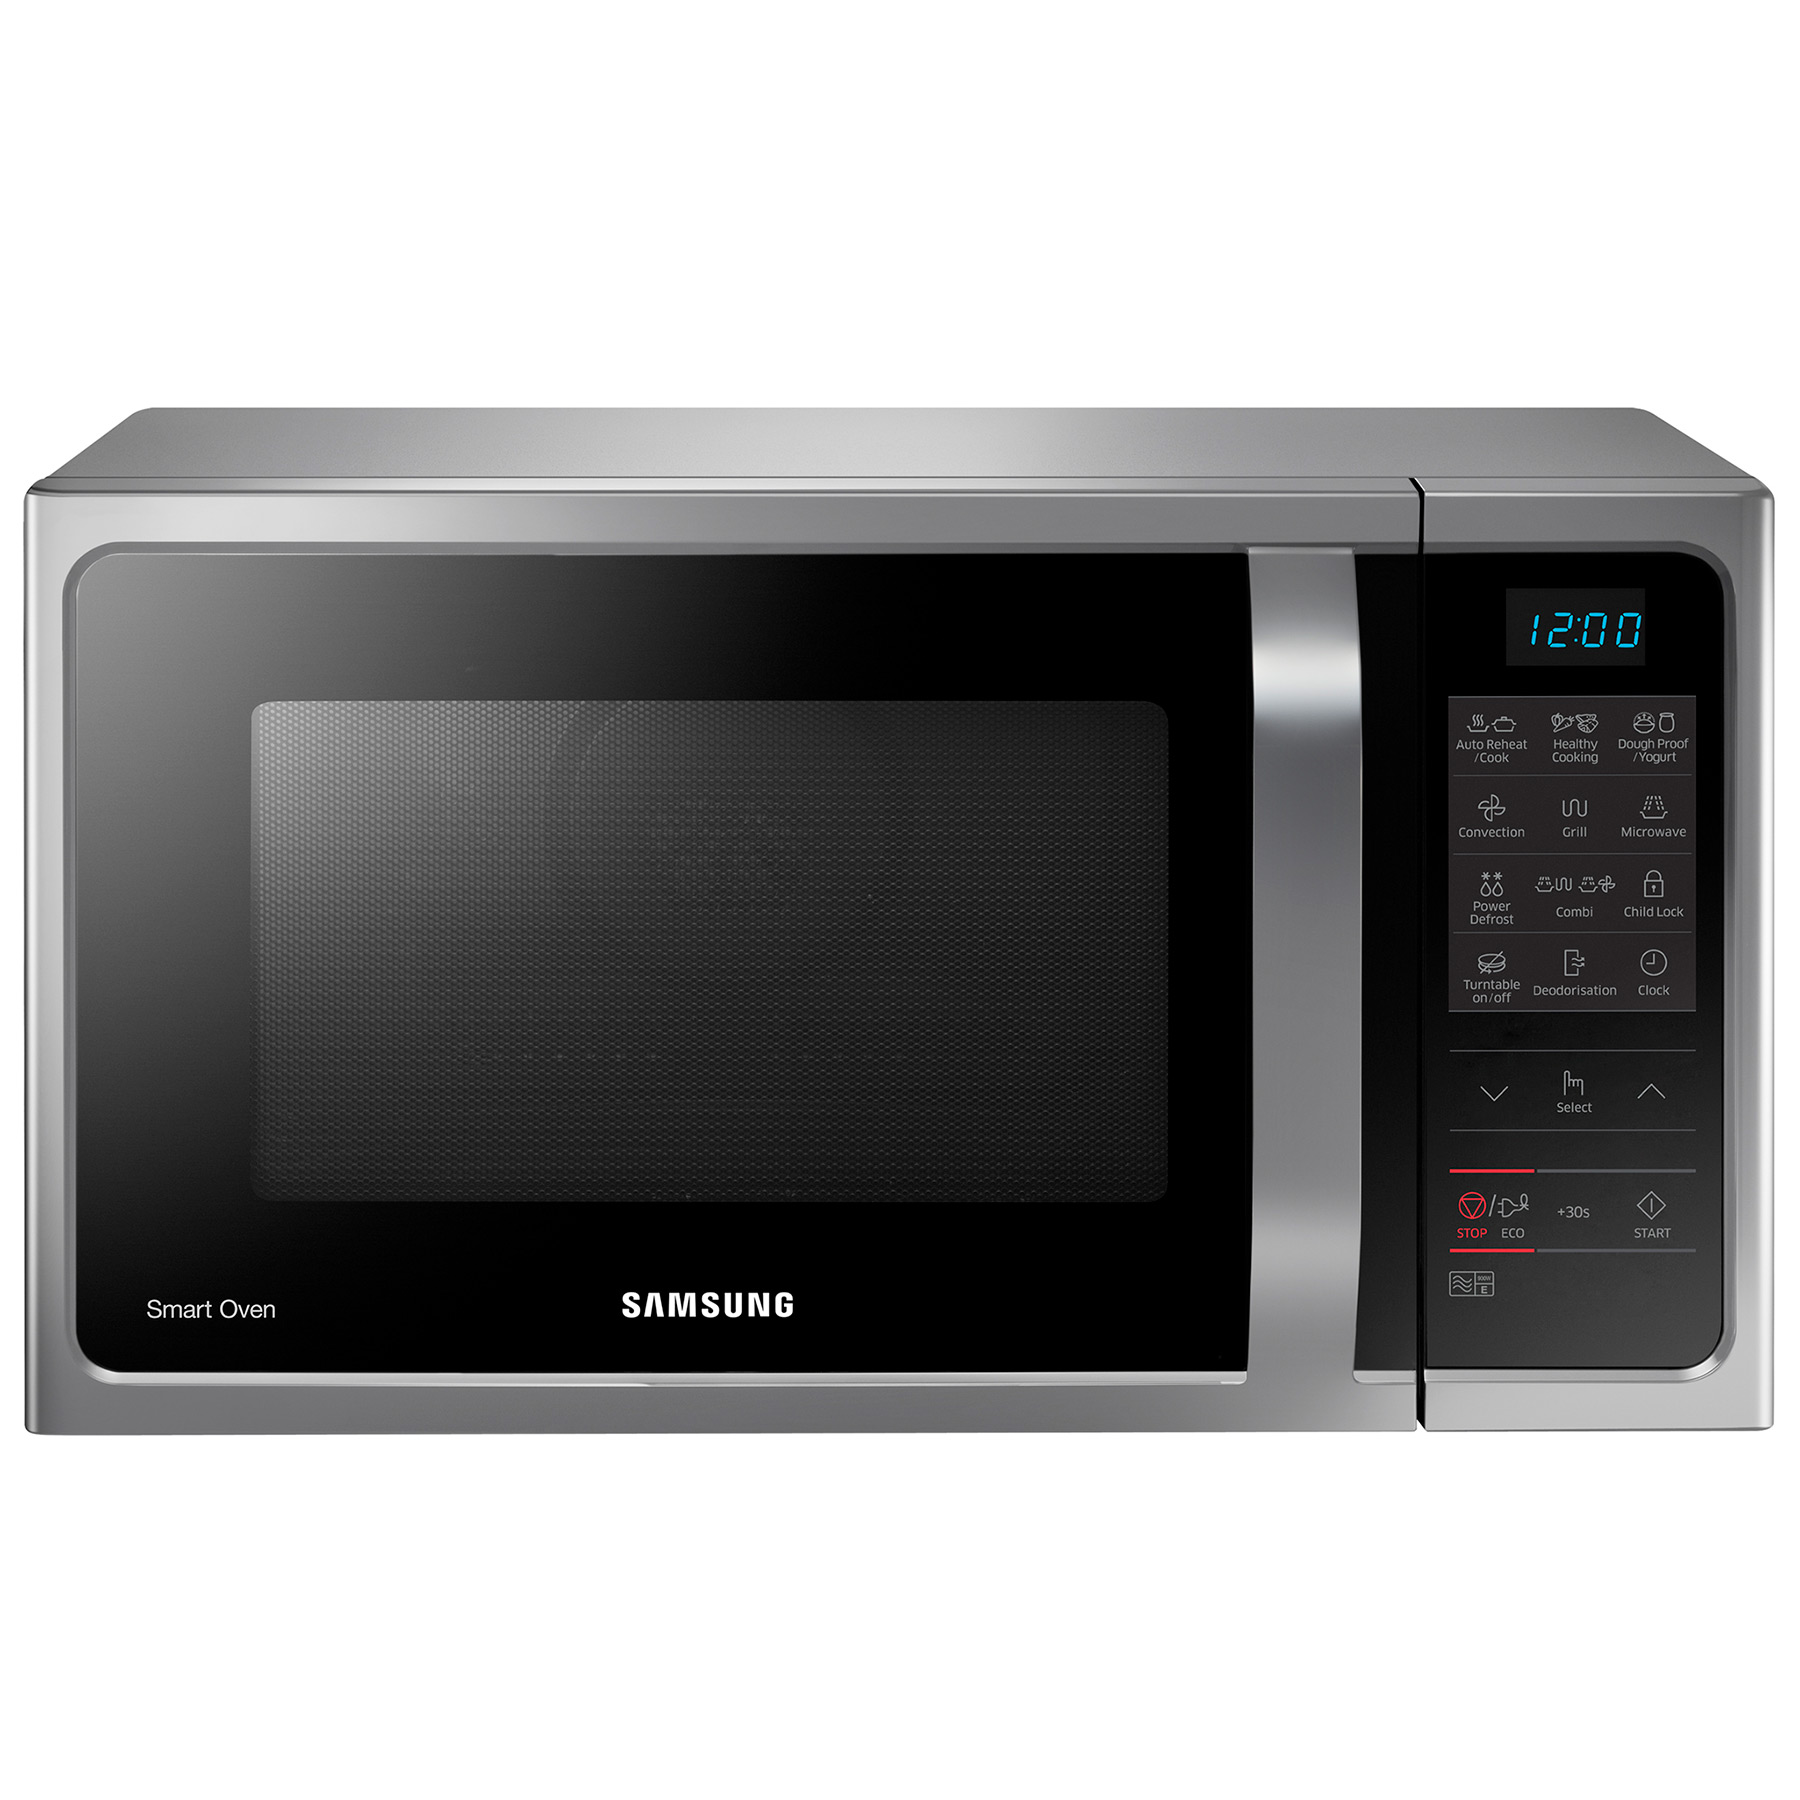 Image of Samsung MC28H5013AS Combination Microwave Oven in Silver 28 Litre 900W